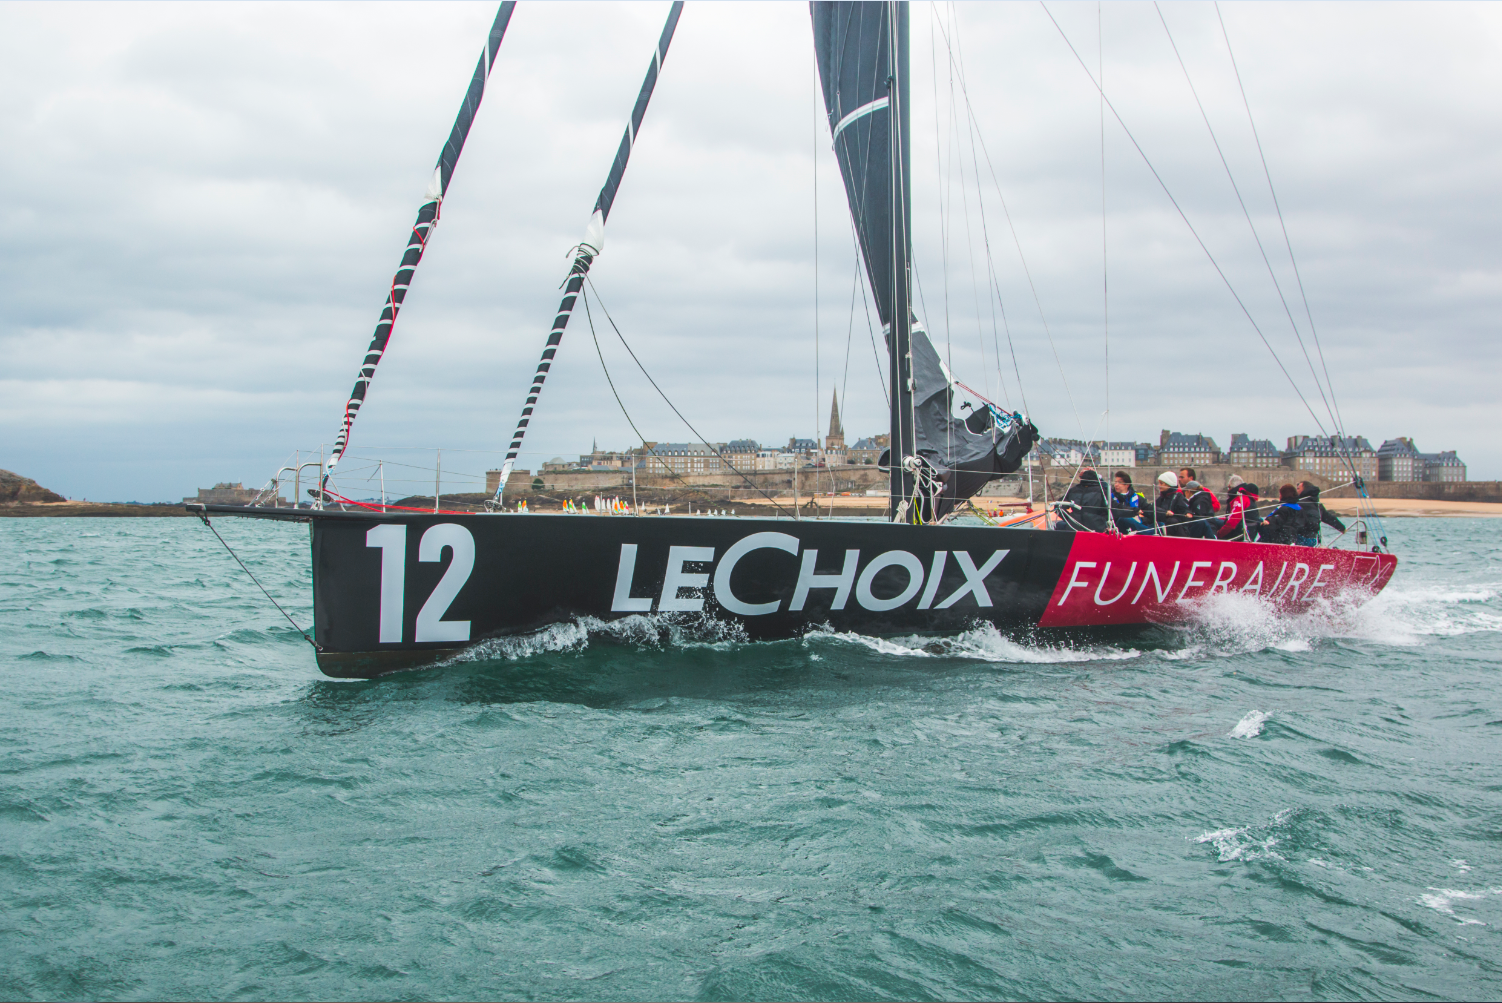 Nils Boyer will be competing on board Le Choix Funeraire in the Rhum Mono class